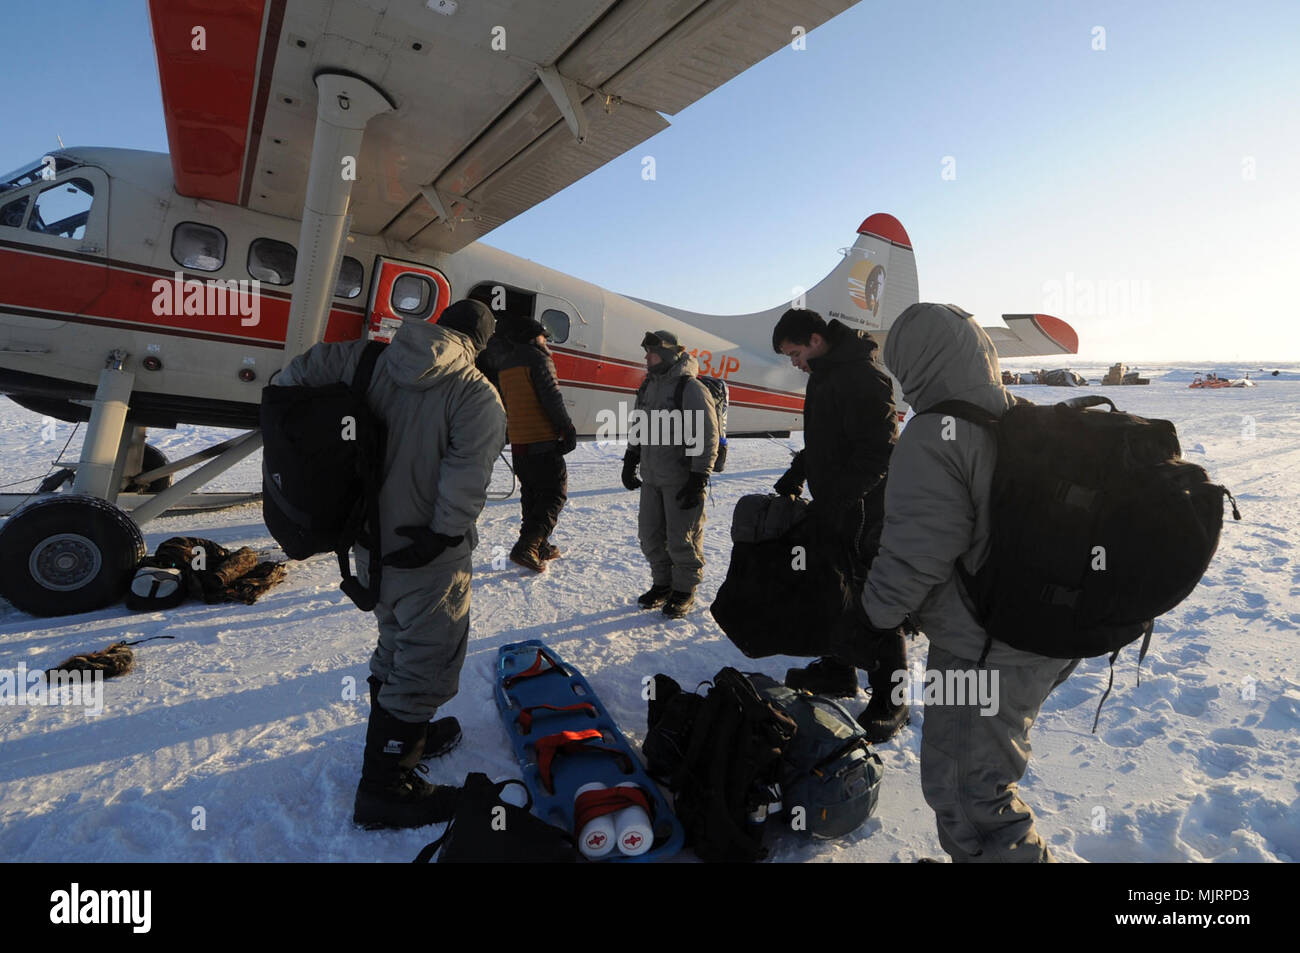 BEAUFORT SEA (March 21, 2018) Personnel at Ice Camp Skate load equipment and bags onboard an aircraft prior to departing camp during Ice Exercise (ICEX) 2018. ICEX 2018 is a five-week exercise that allows the Navy to assess its operational readiness in the Arctic, increase experience in the region, advance understanding of the Arctic environment, and continue to develop relationships with other services, allies and partner organizations. Armed Forces and civilians displaying courage bravery dedication commitment and sacrifice Stock Photo